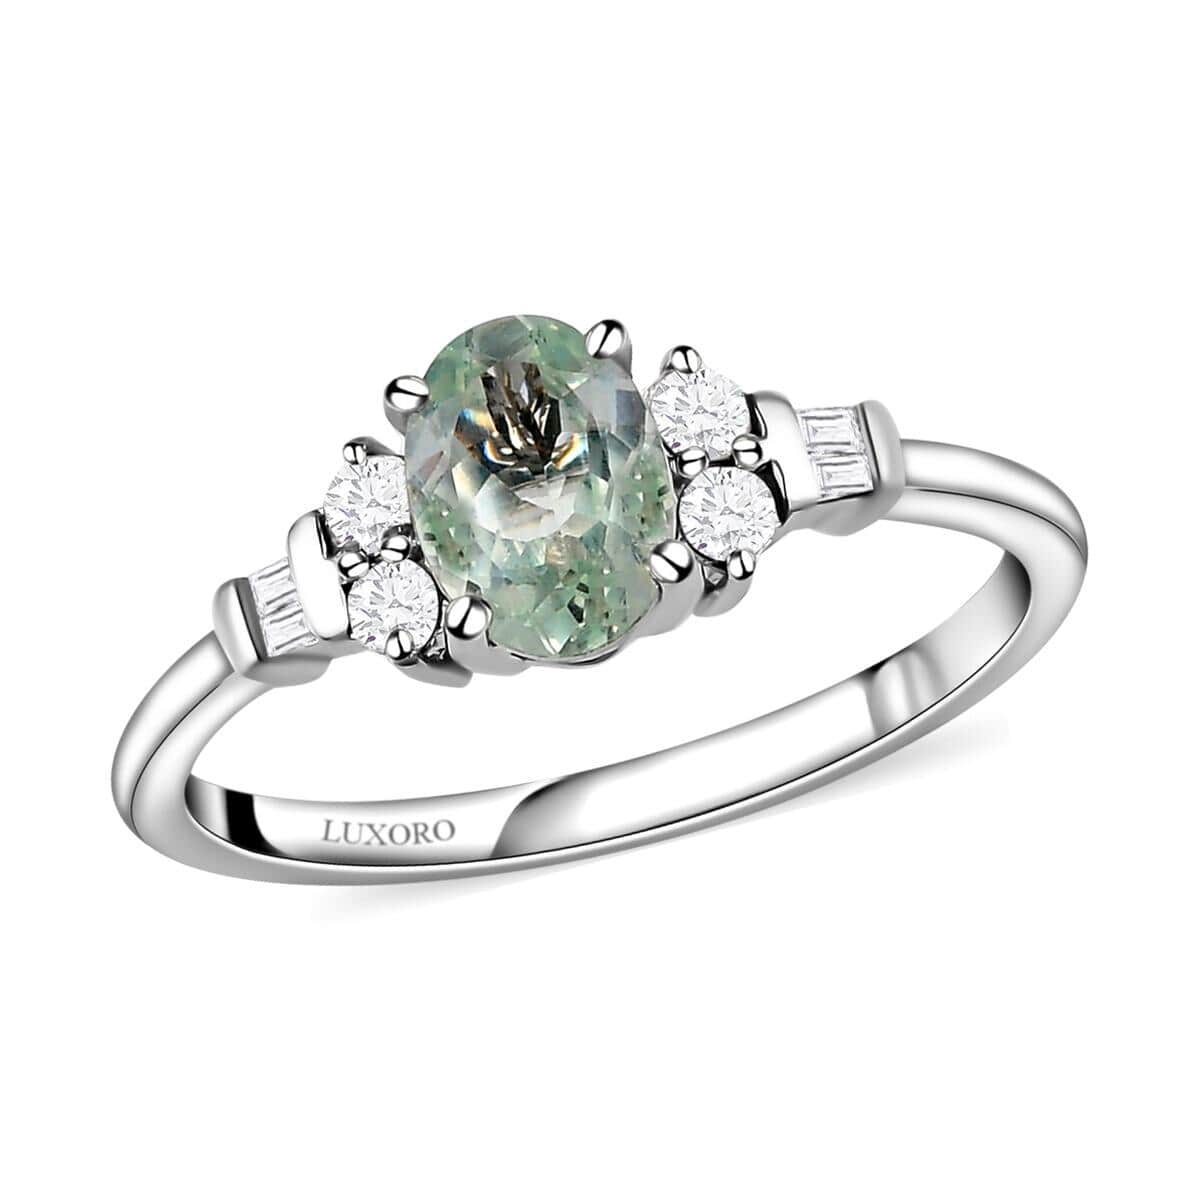 LUXORO 14K White Gold AAA Narsipatnam Alexandrite and G-H I3 Diamond Ring 2 Grams (Delivery in 12-15 Business Days) 1.10 ctw image number 0